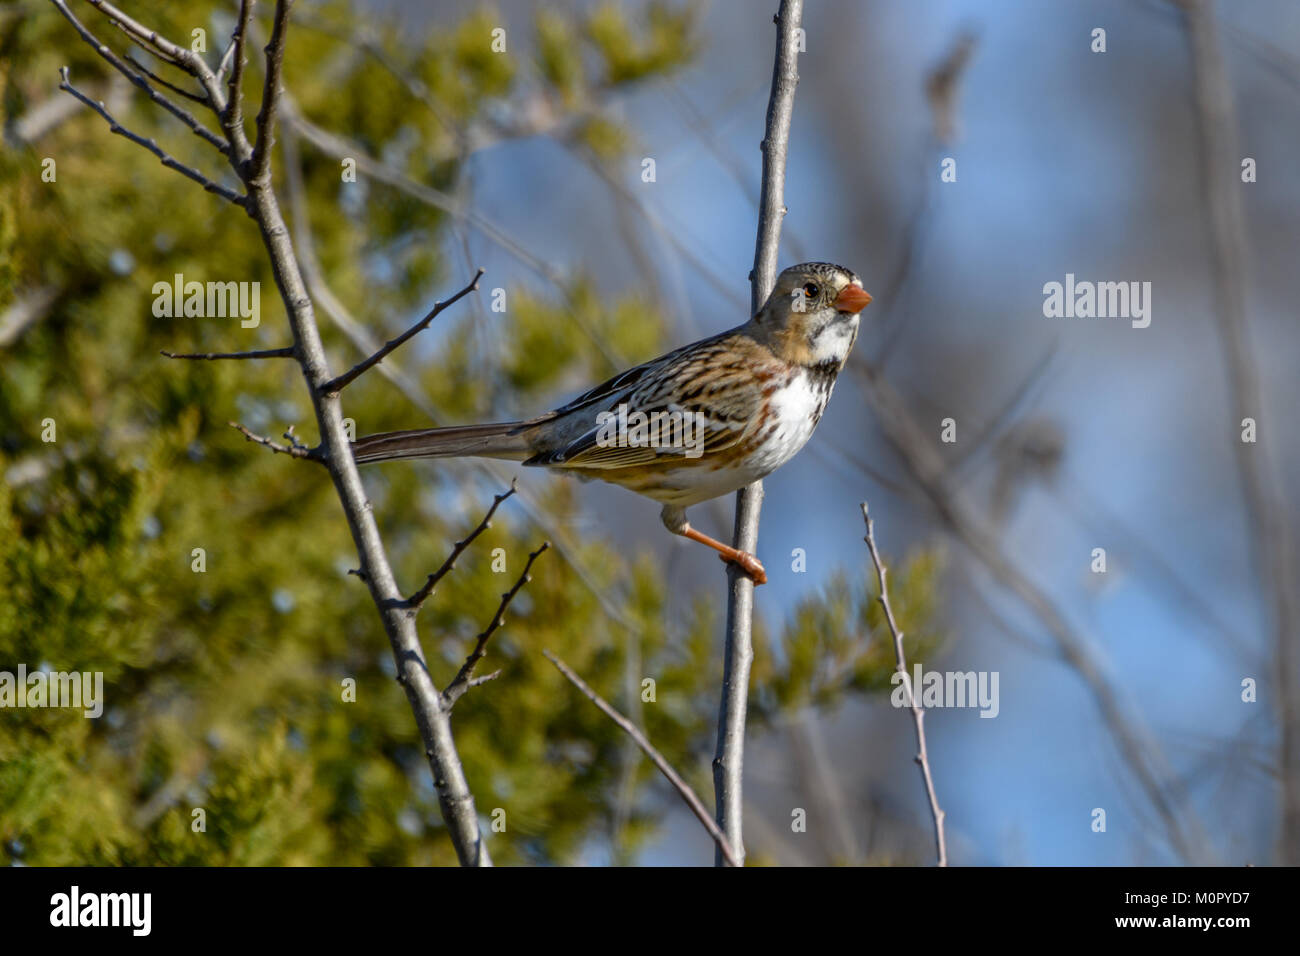 Harris's Sparrow - Zonotrichia querula, perched on a branch with trees and blue sky background Stock Photo